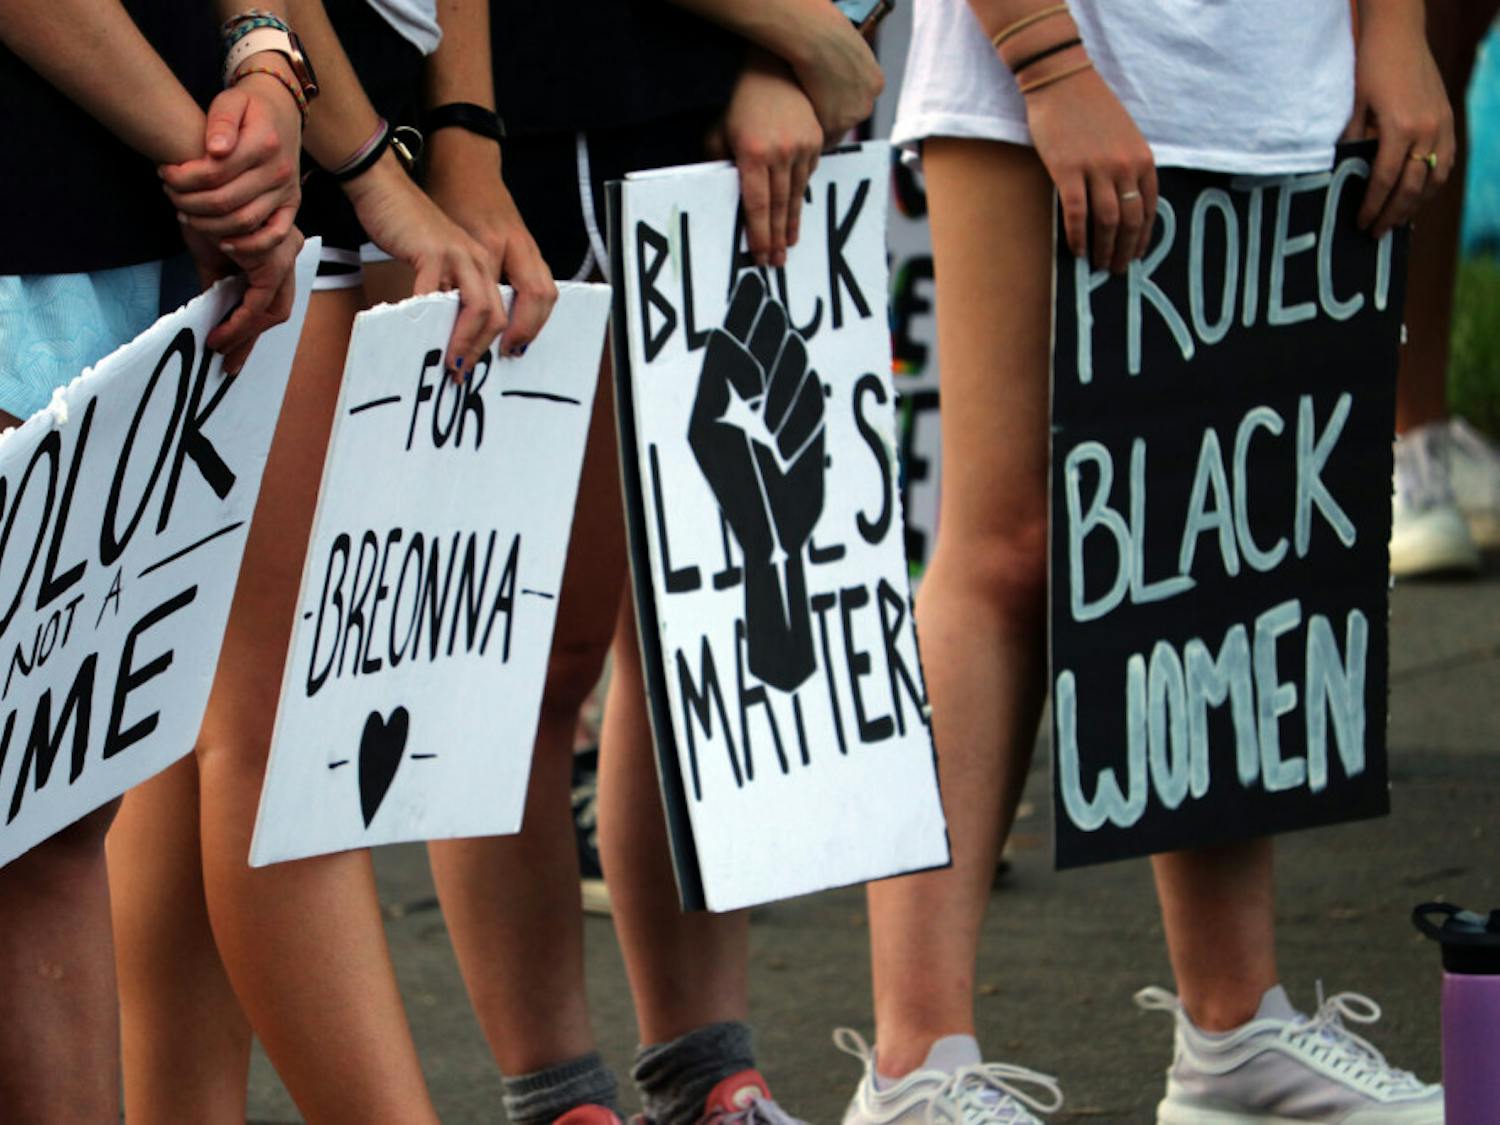 Signs stating “Color is not a crime,” “For Breonna,” “Black Lives Matter,” and “Protect black women” are seen at the protest starting at Bo Didley Plaza in Gainesville on Saturday, Sept. 26, 2020. (Asta Hemenway/Alligator Staff)